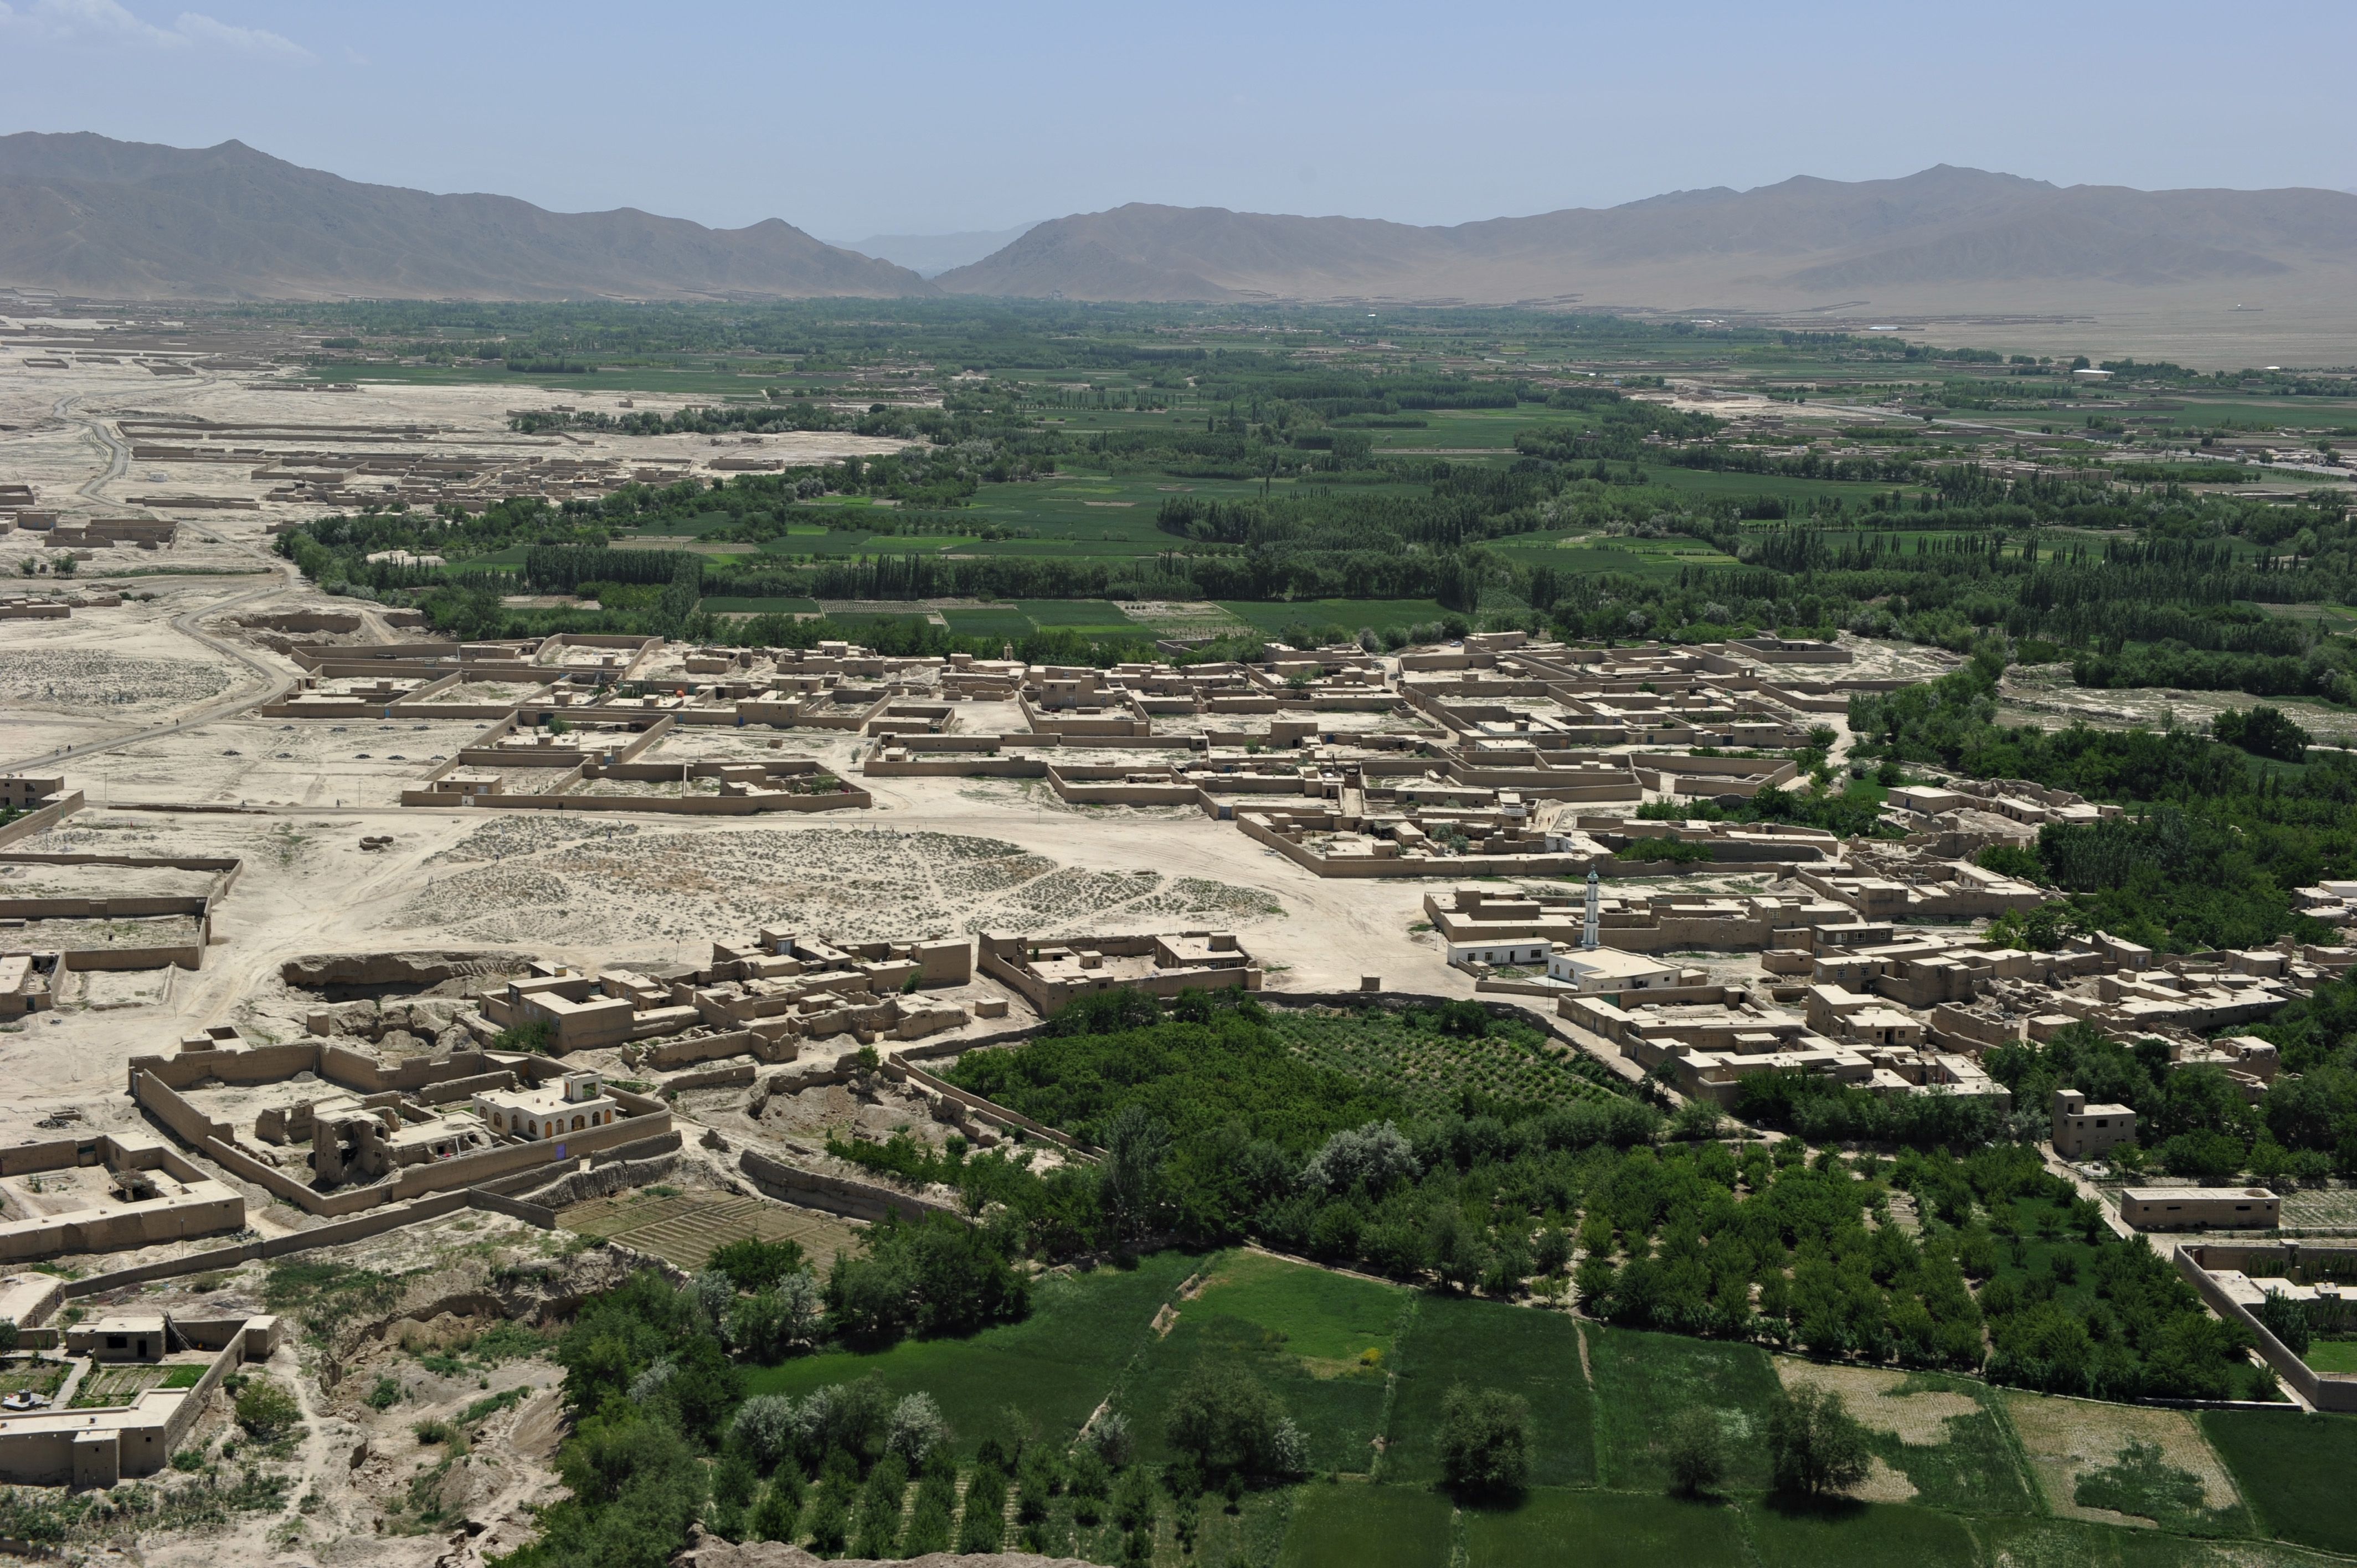 Aerial view of Mohammad Agha District, Logar Province, Afghanistan